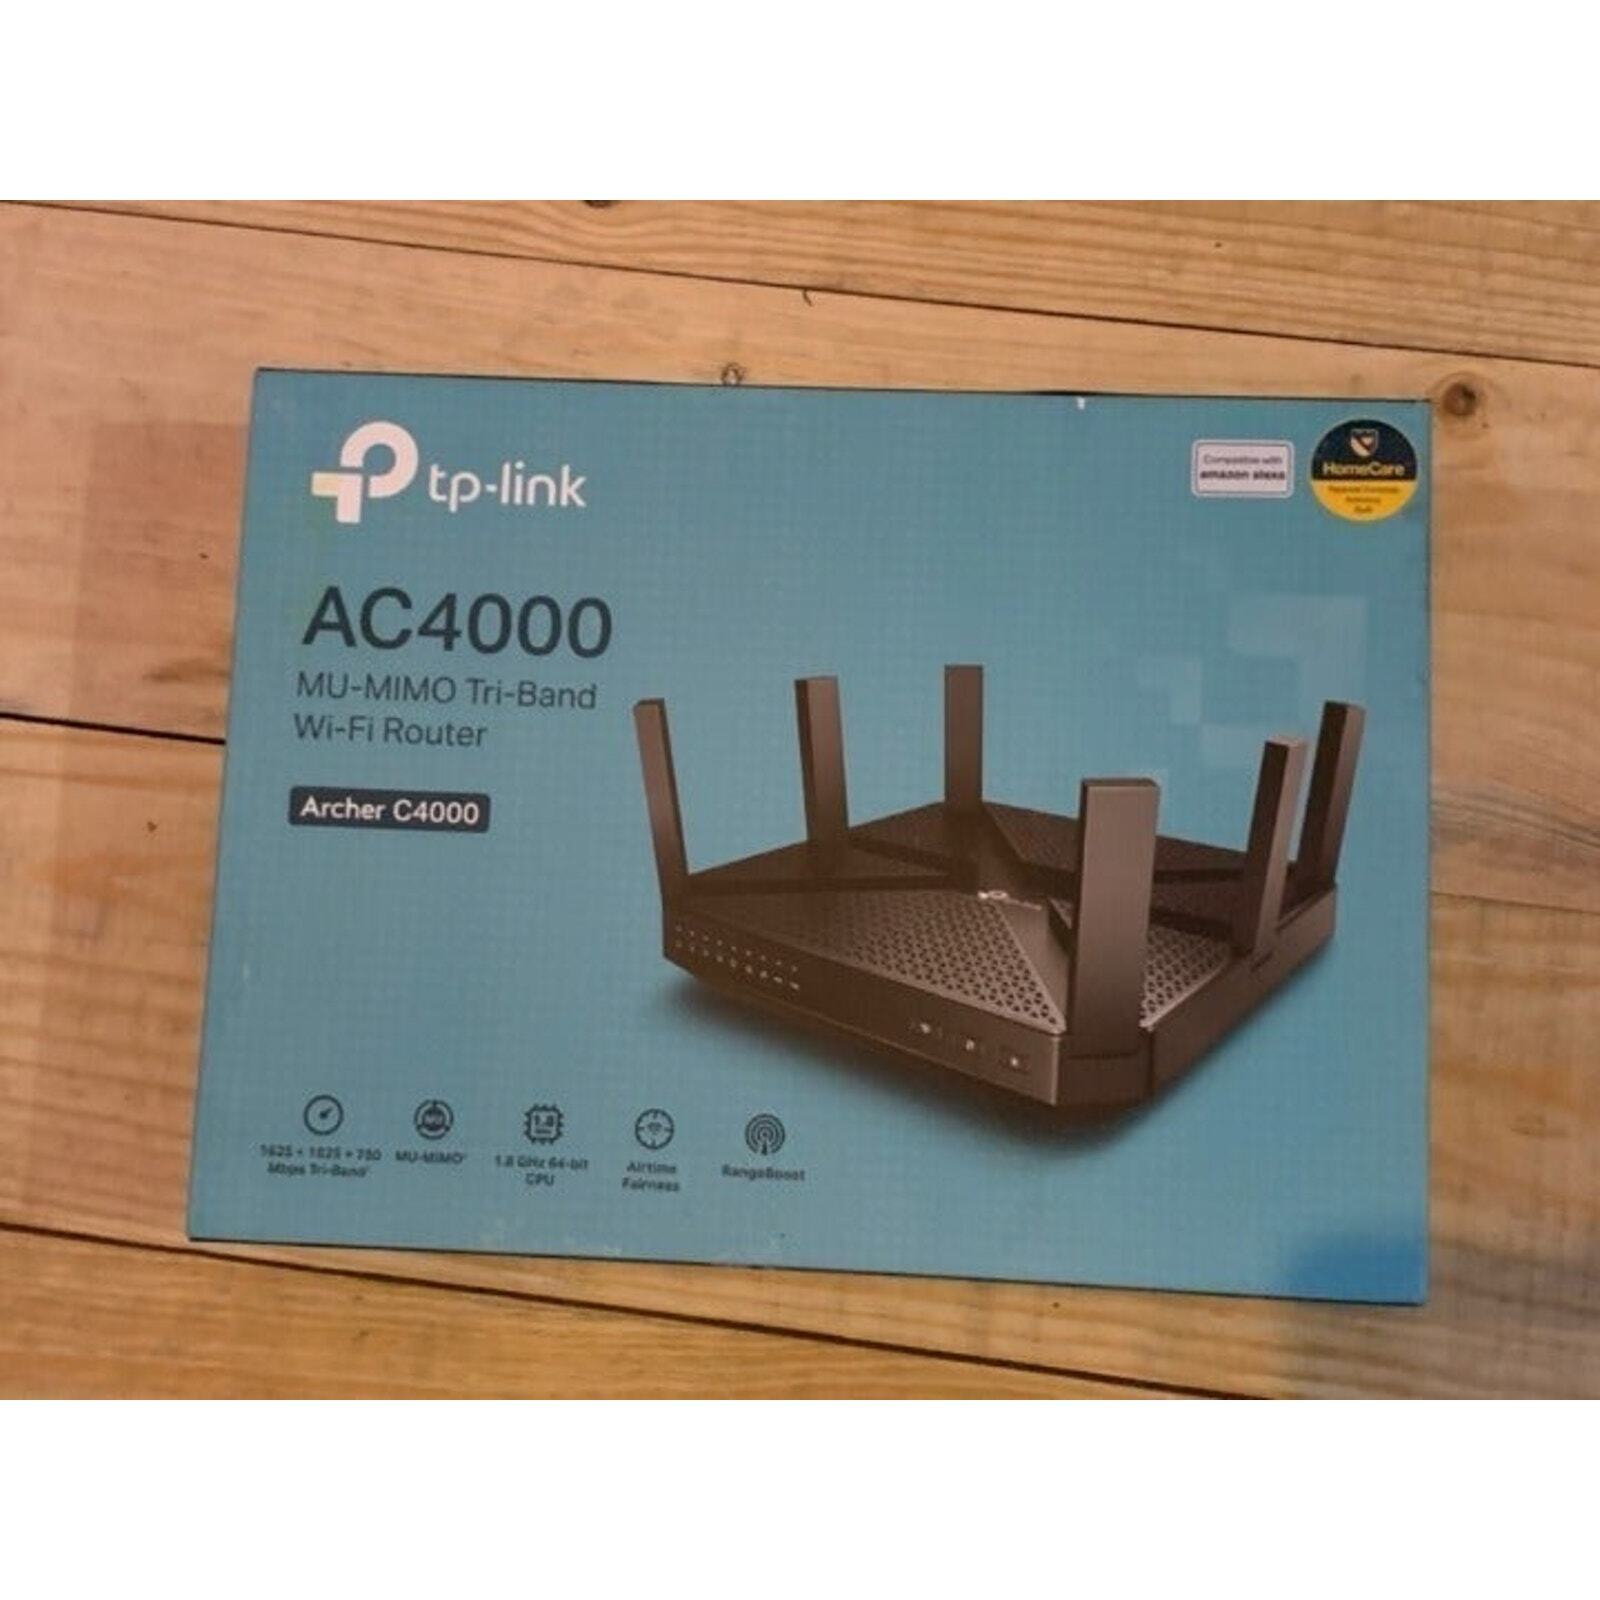 TP-link AC4000 MU-MIMO Tri-band Wif-Fi router